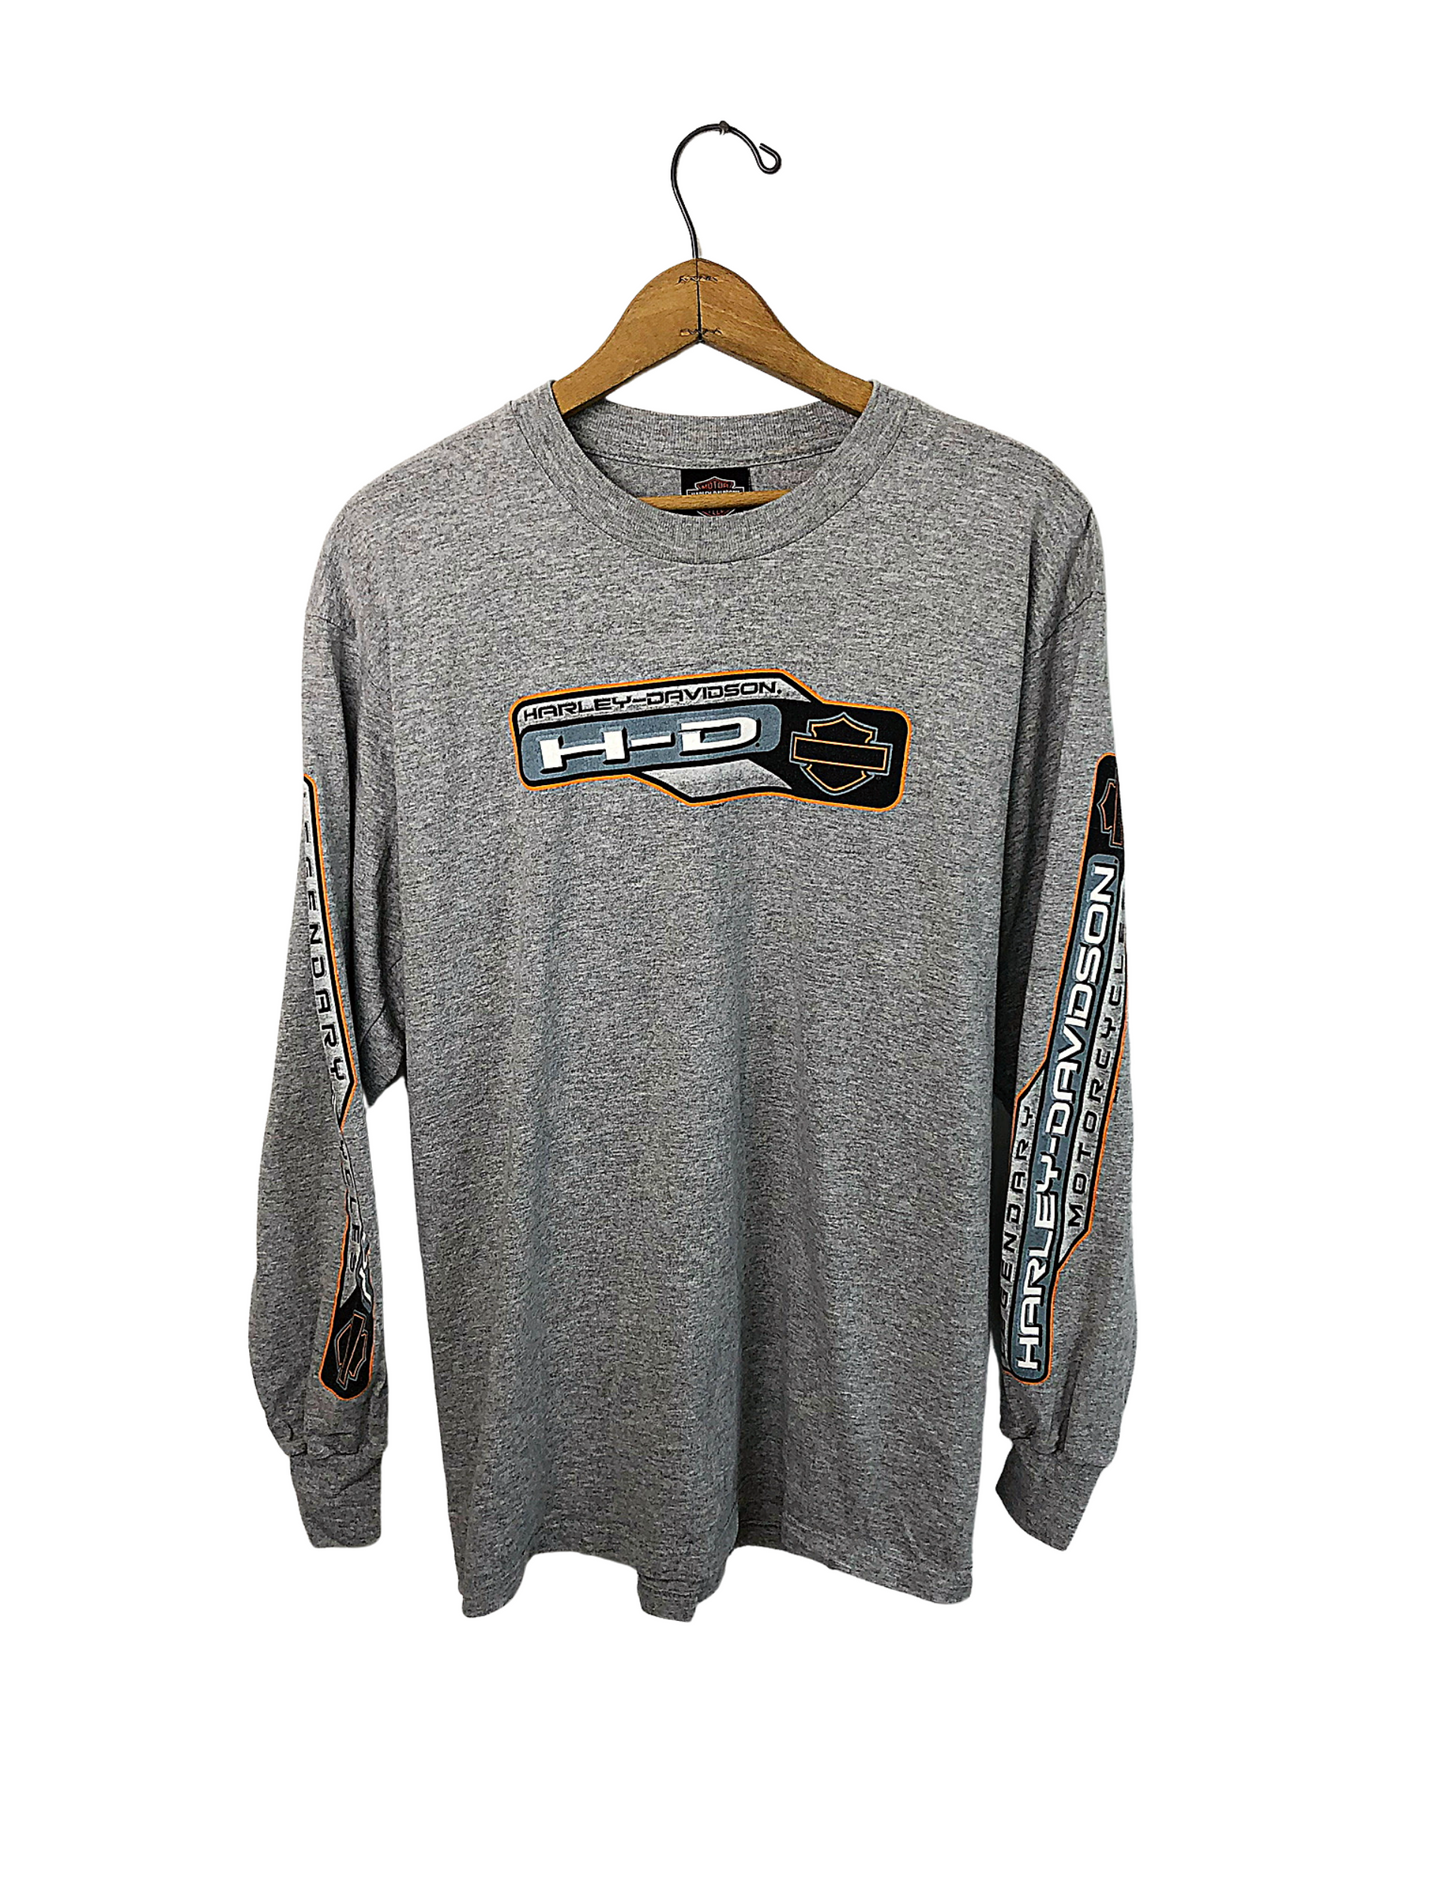 ‘99 Harley Davidson Motorcycles De Kalb, Illinois Spell-out Sleeve Long Sleeve Tee Size Large